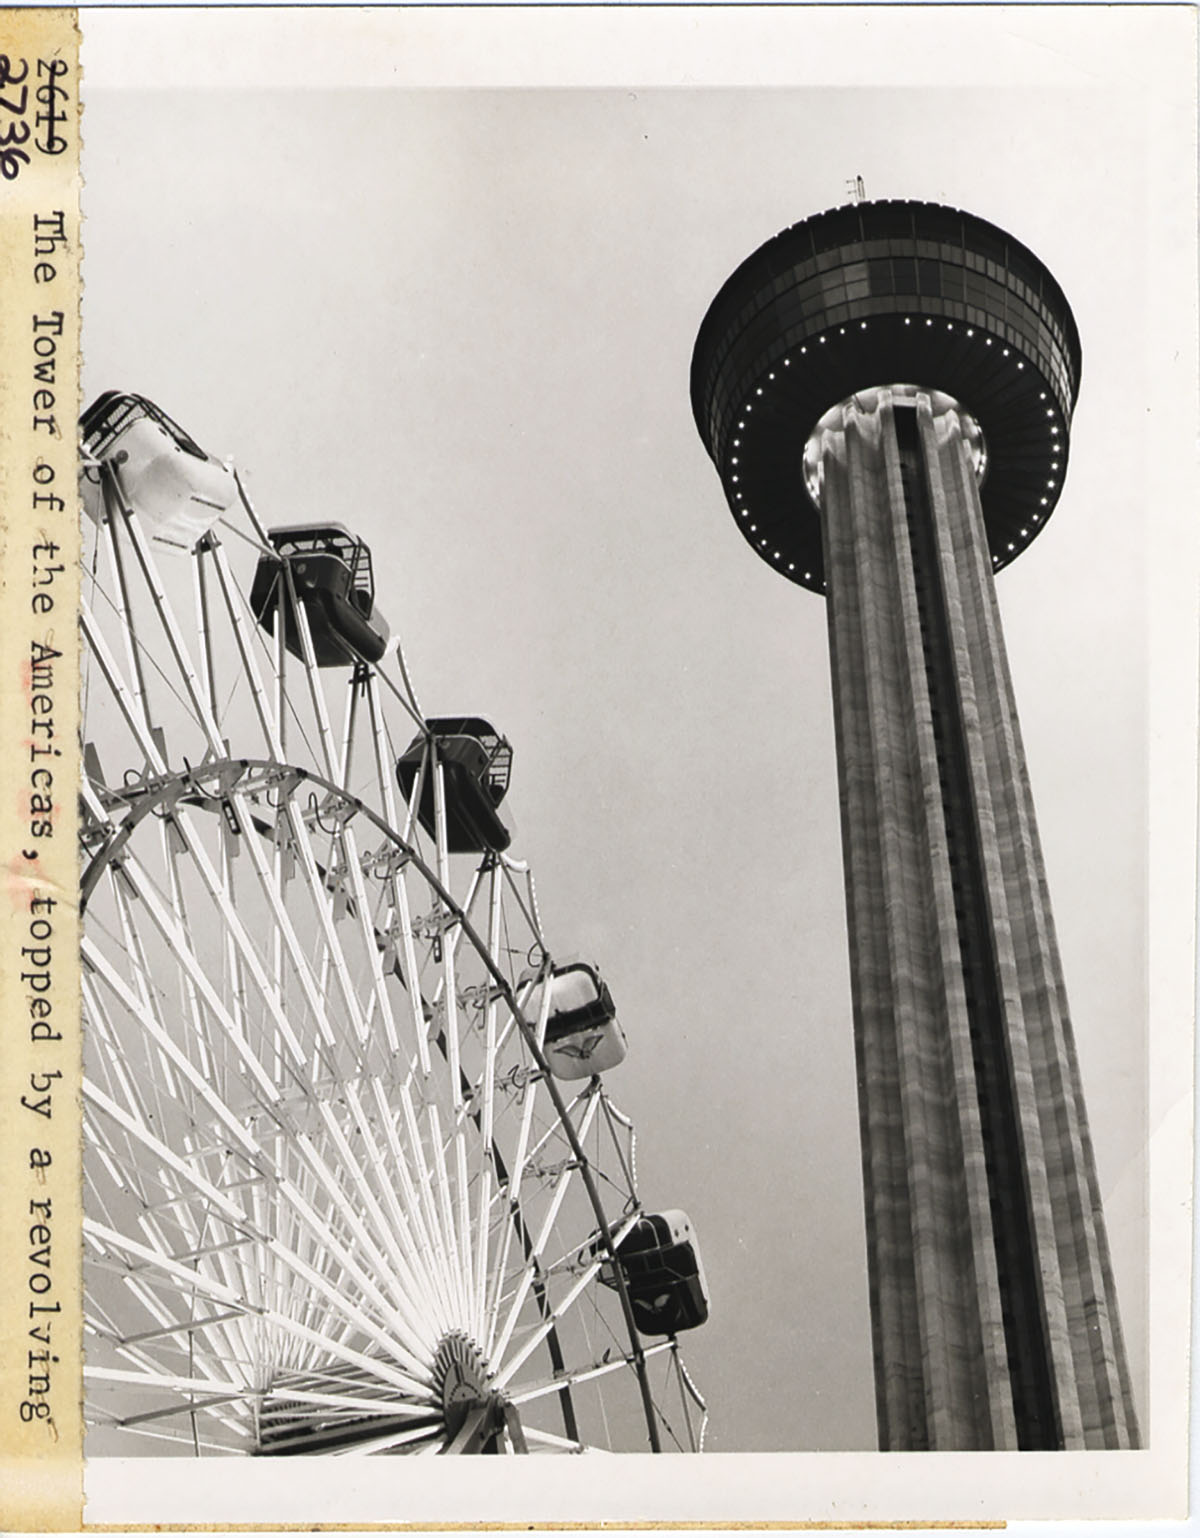 A tall tower with a black top next to a white and black Ferris wheel in a historic photograph